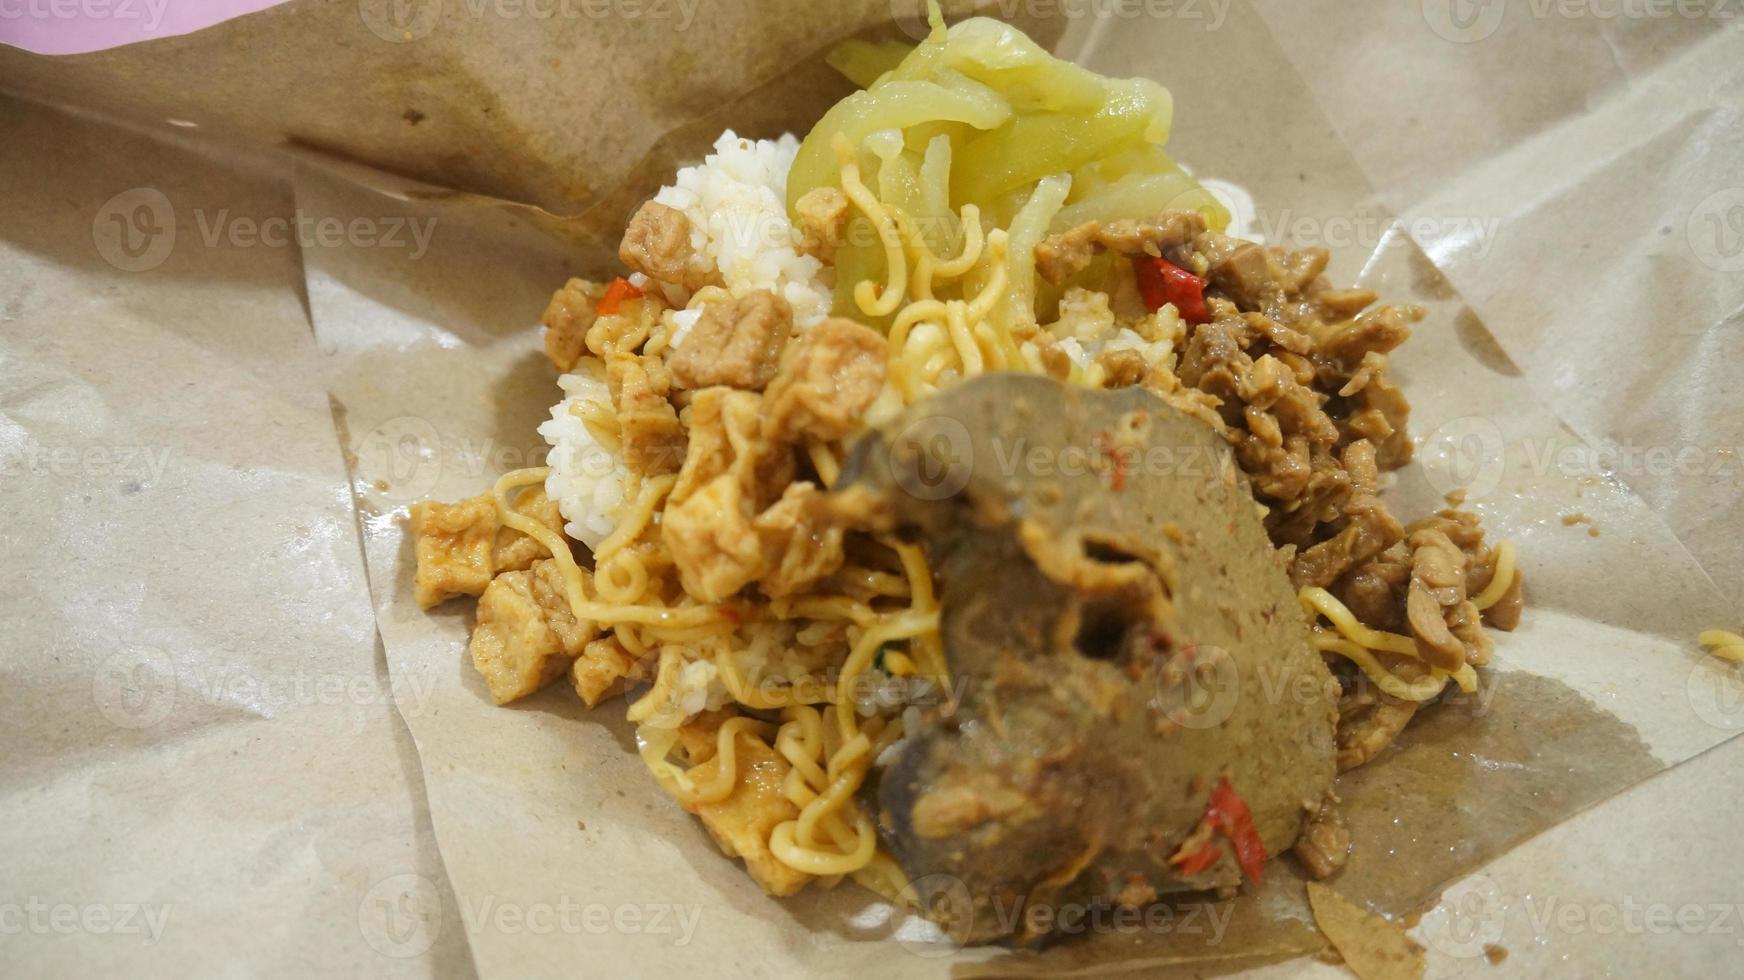 Nasi kucing special, cat rice special with opor hati sapi on a paper wrap photo